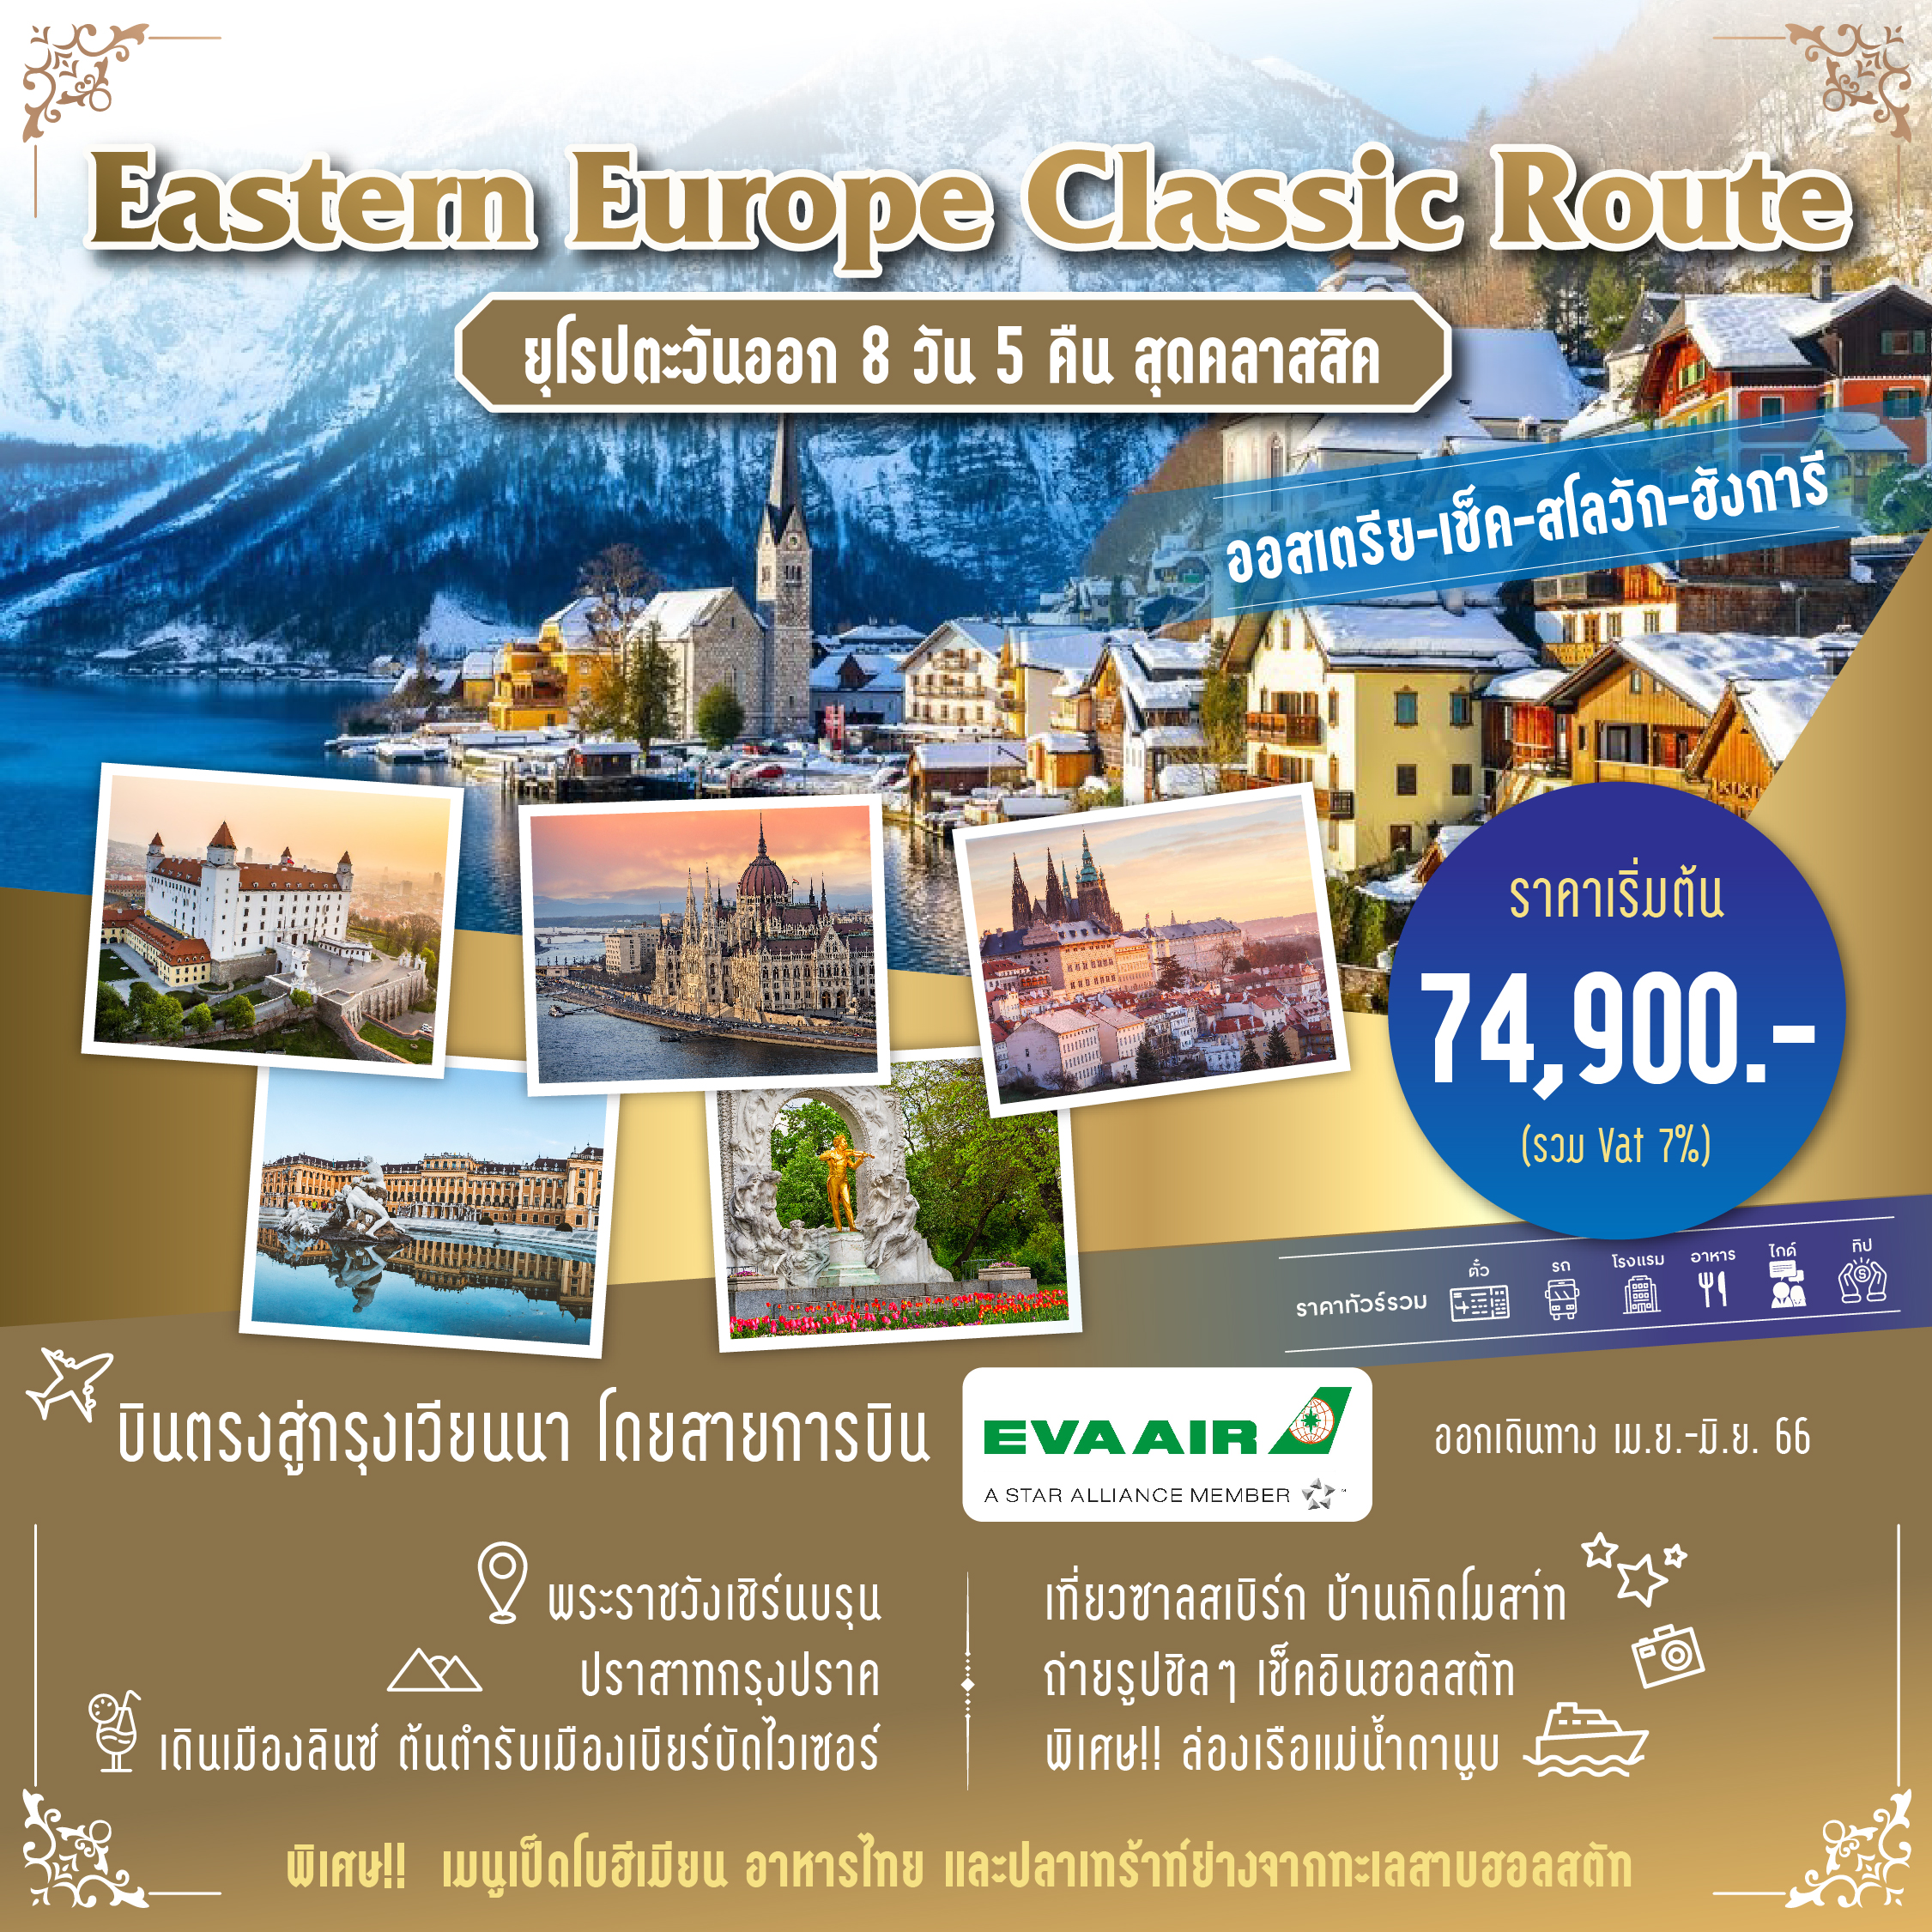 Eastern Europe Classic Route